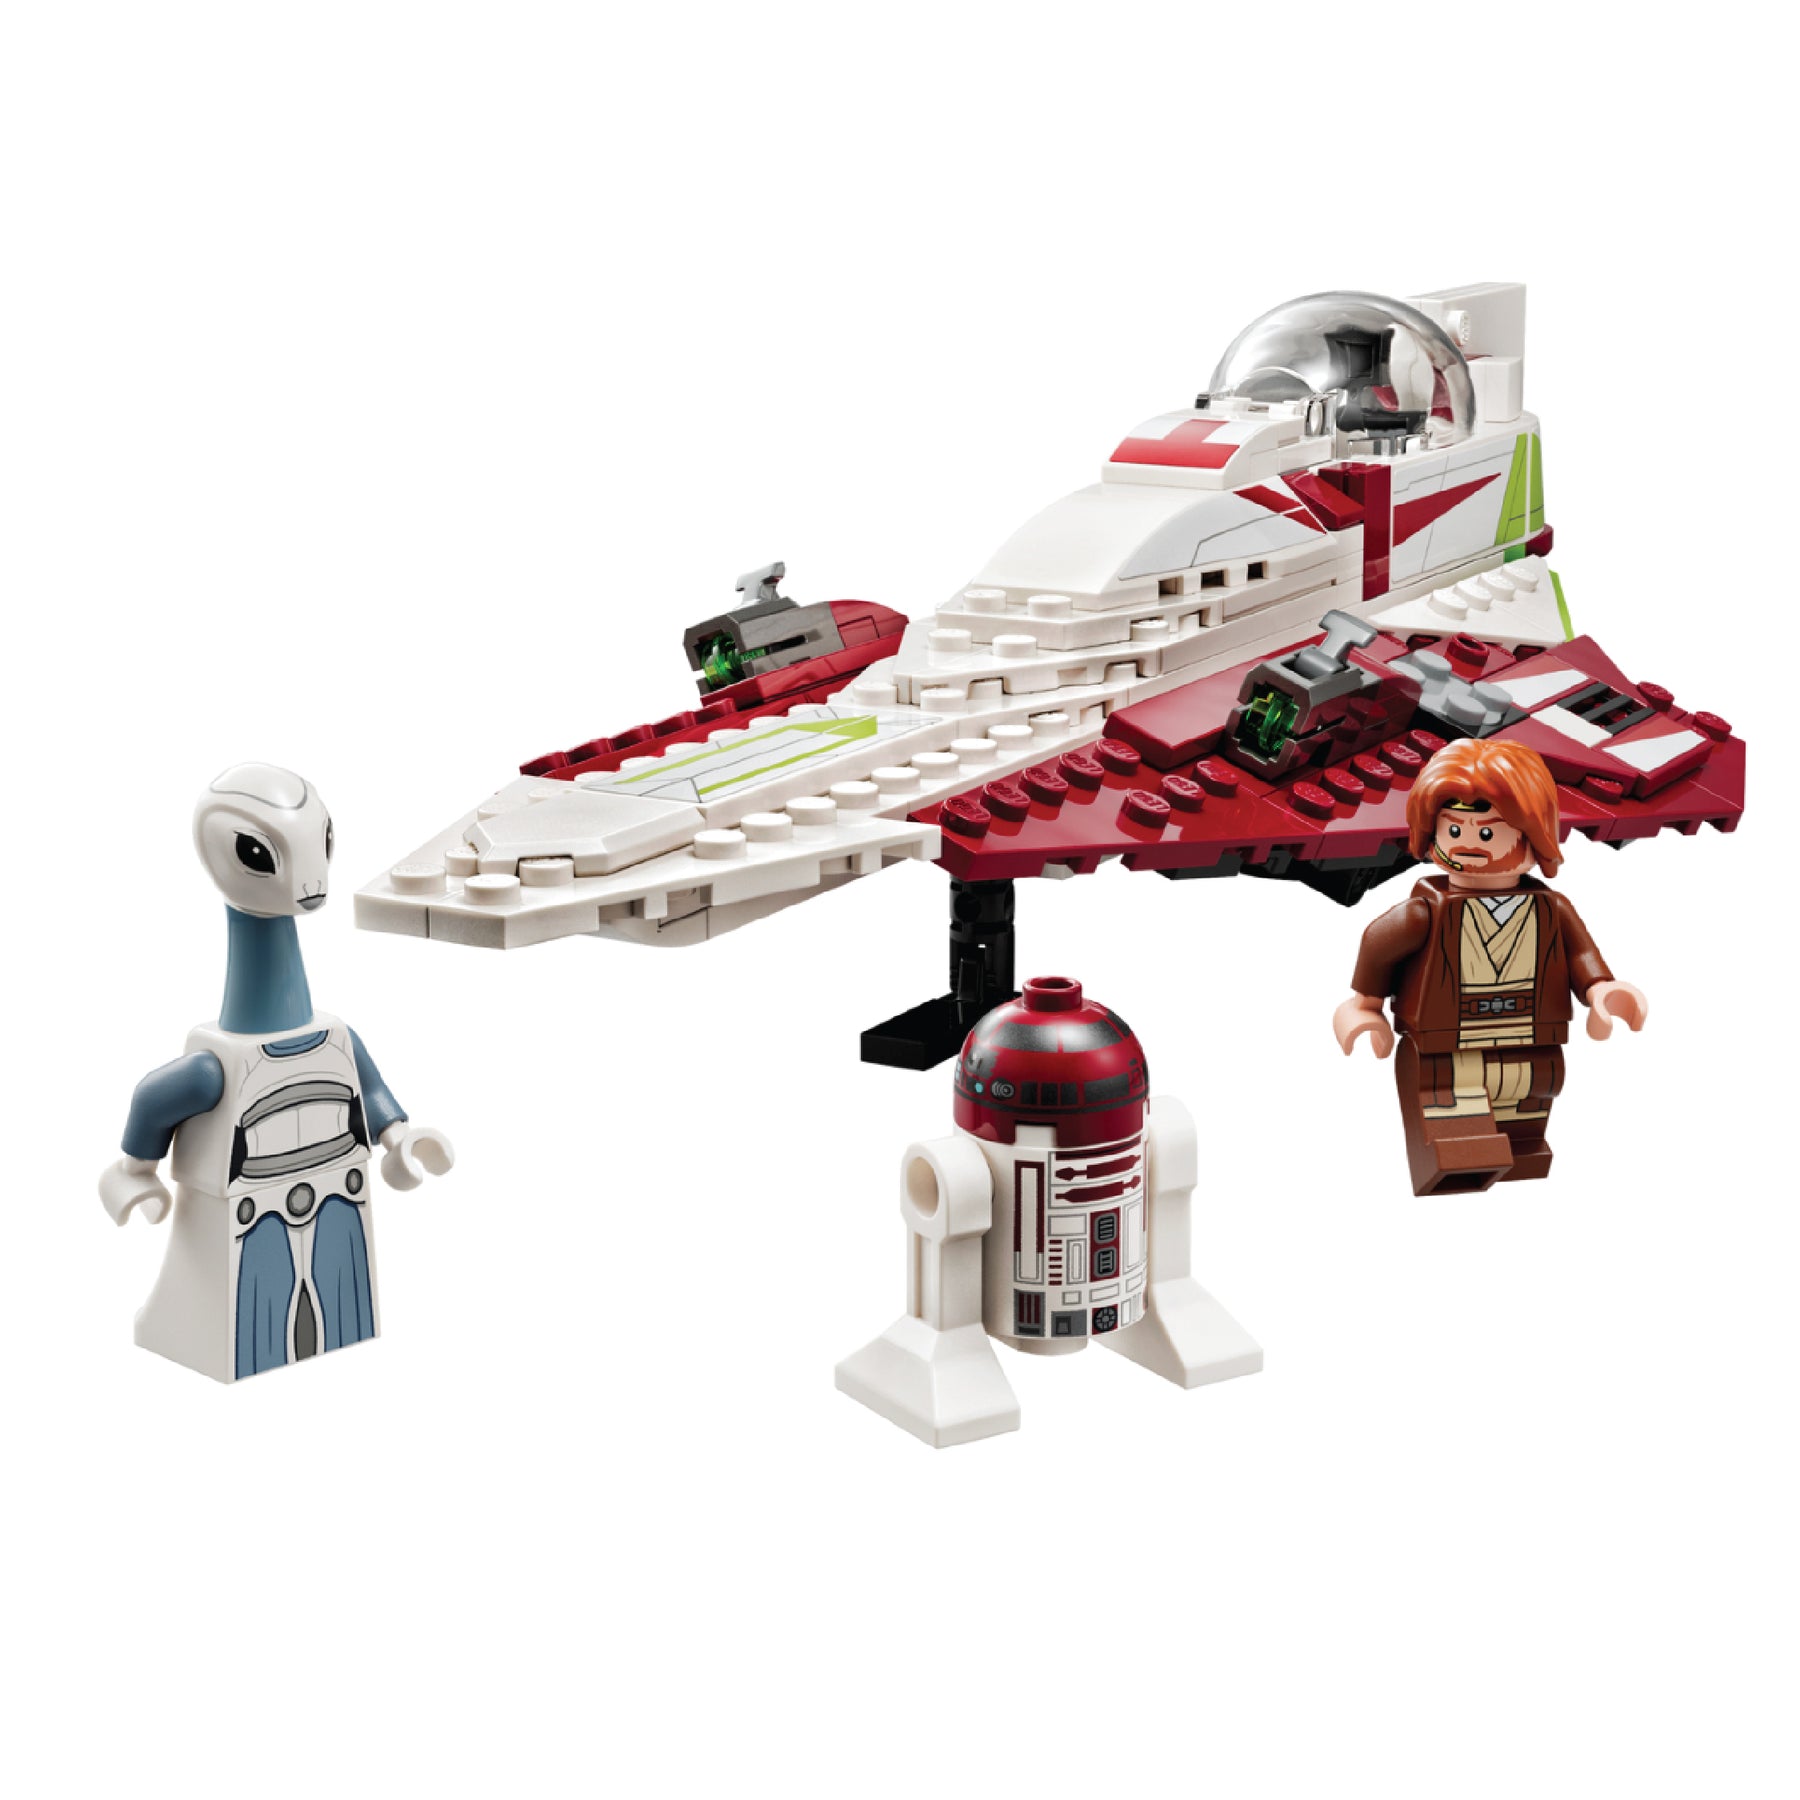  LEGO Star Wars Endor Speeder Chase Diorama 75353 Home Décor  Building Set for Adults, Classic Collectible with Luke Skywalker and  Princess Leia Minifigures, Fun Birthday Gift for Star Wars Fans 